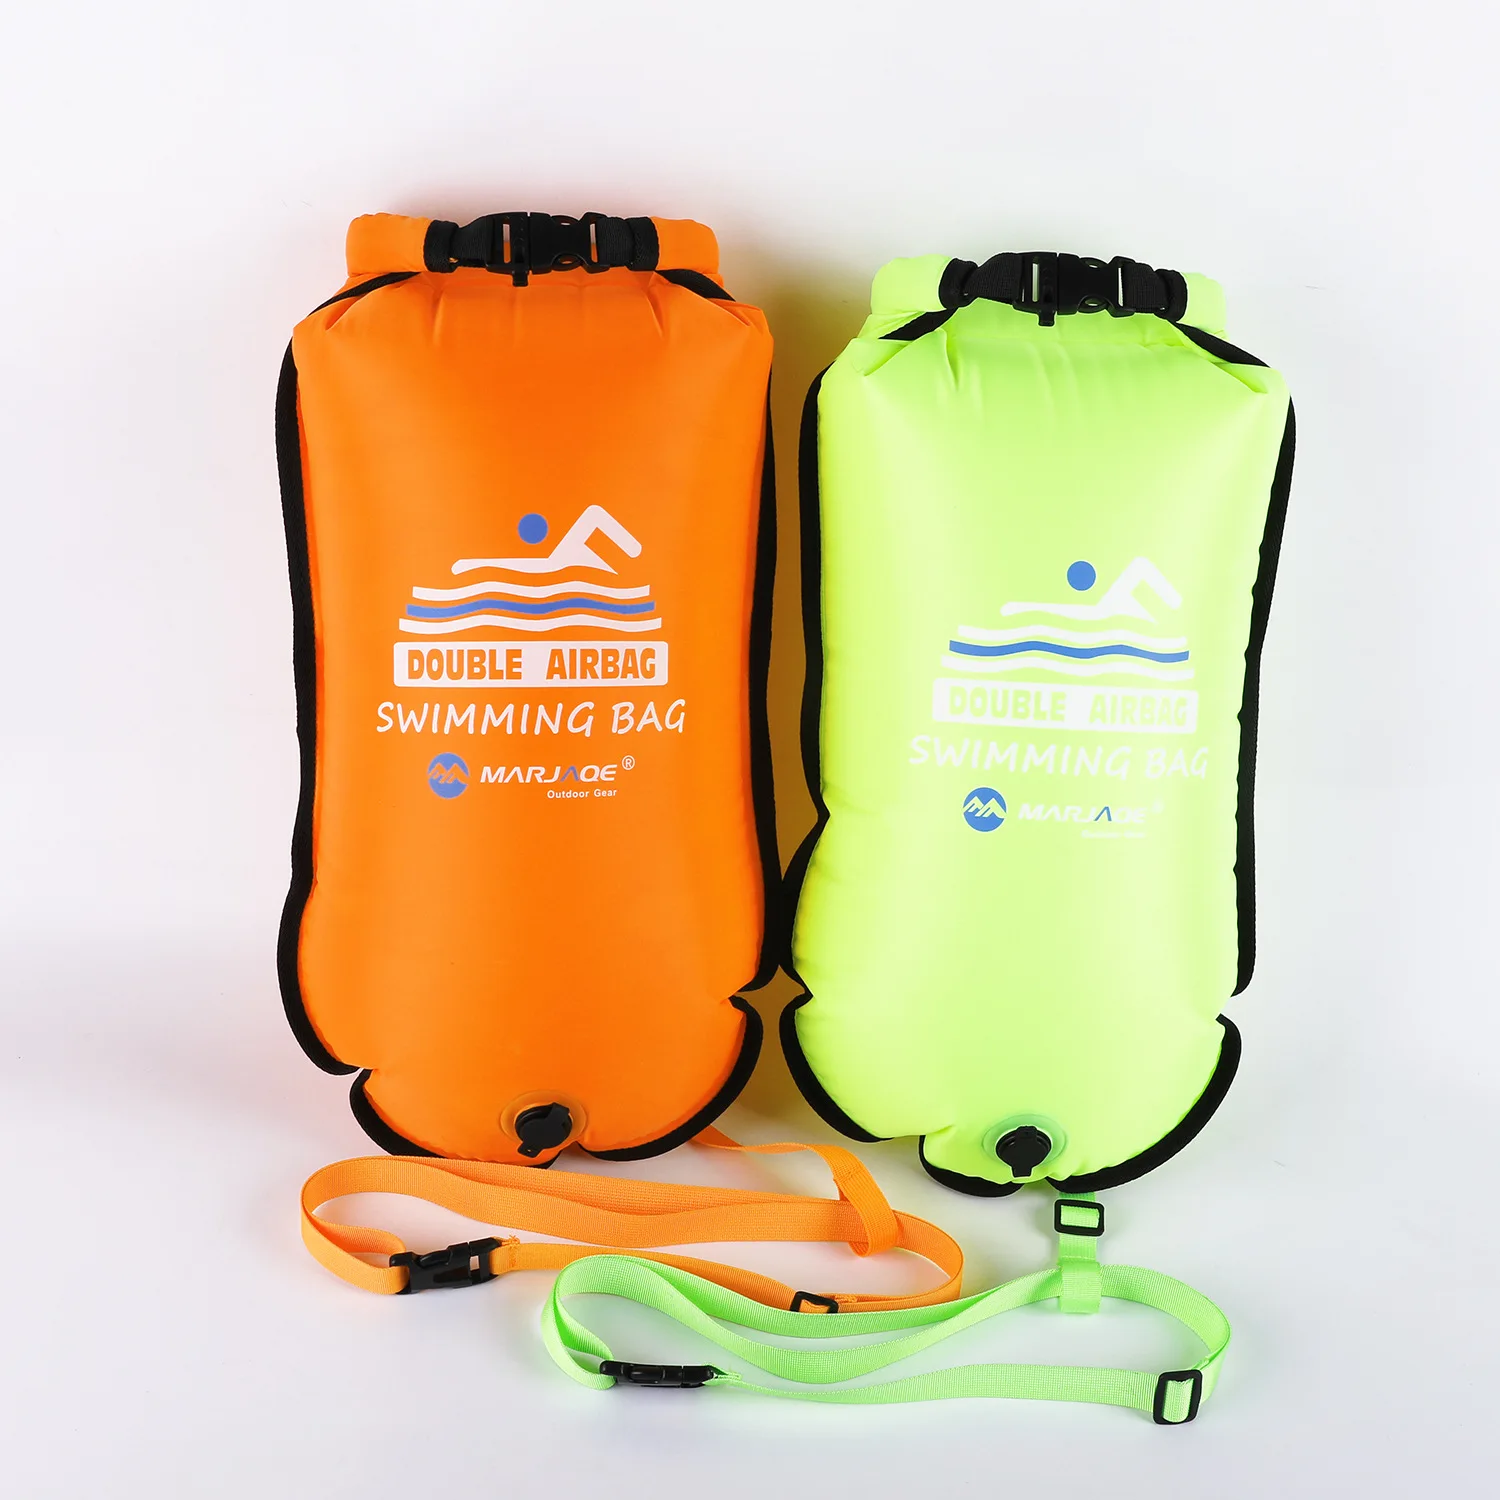 lnflatable Open PVC Swimming Buoy Tow Float Dry Bag Double AirBag With Belt High Visibility Swimming Water Sport Safety Pouch